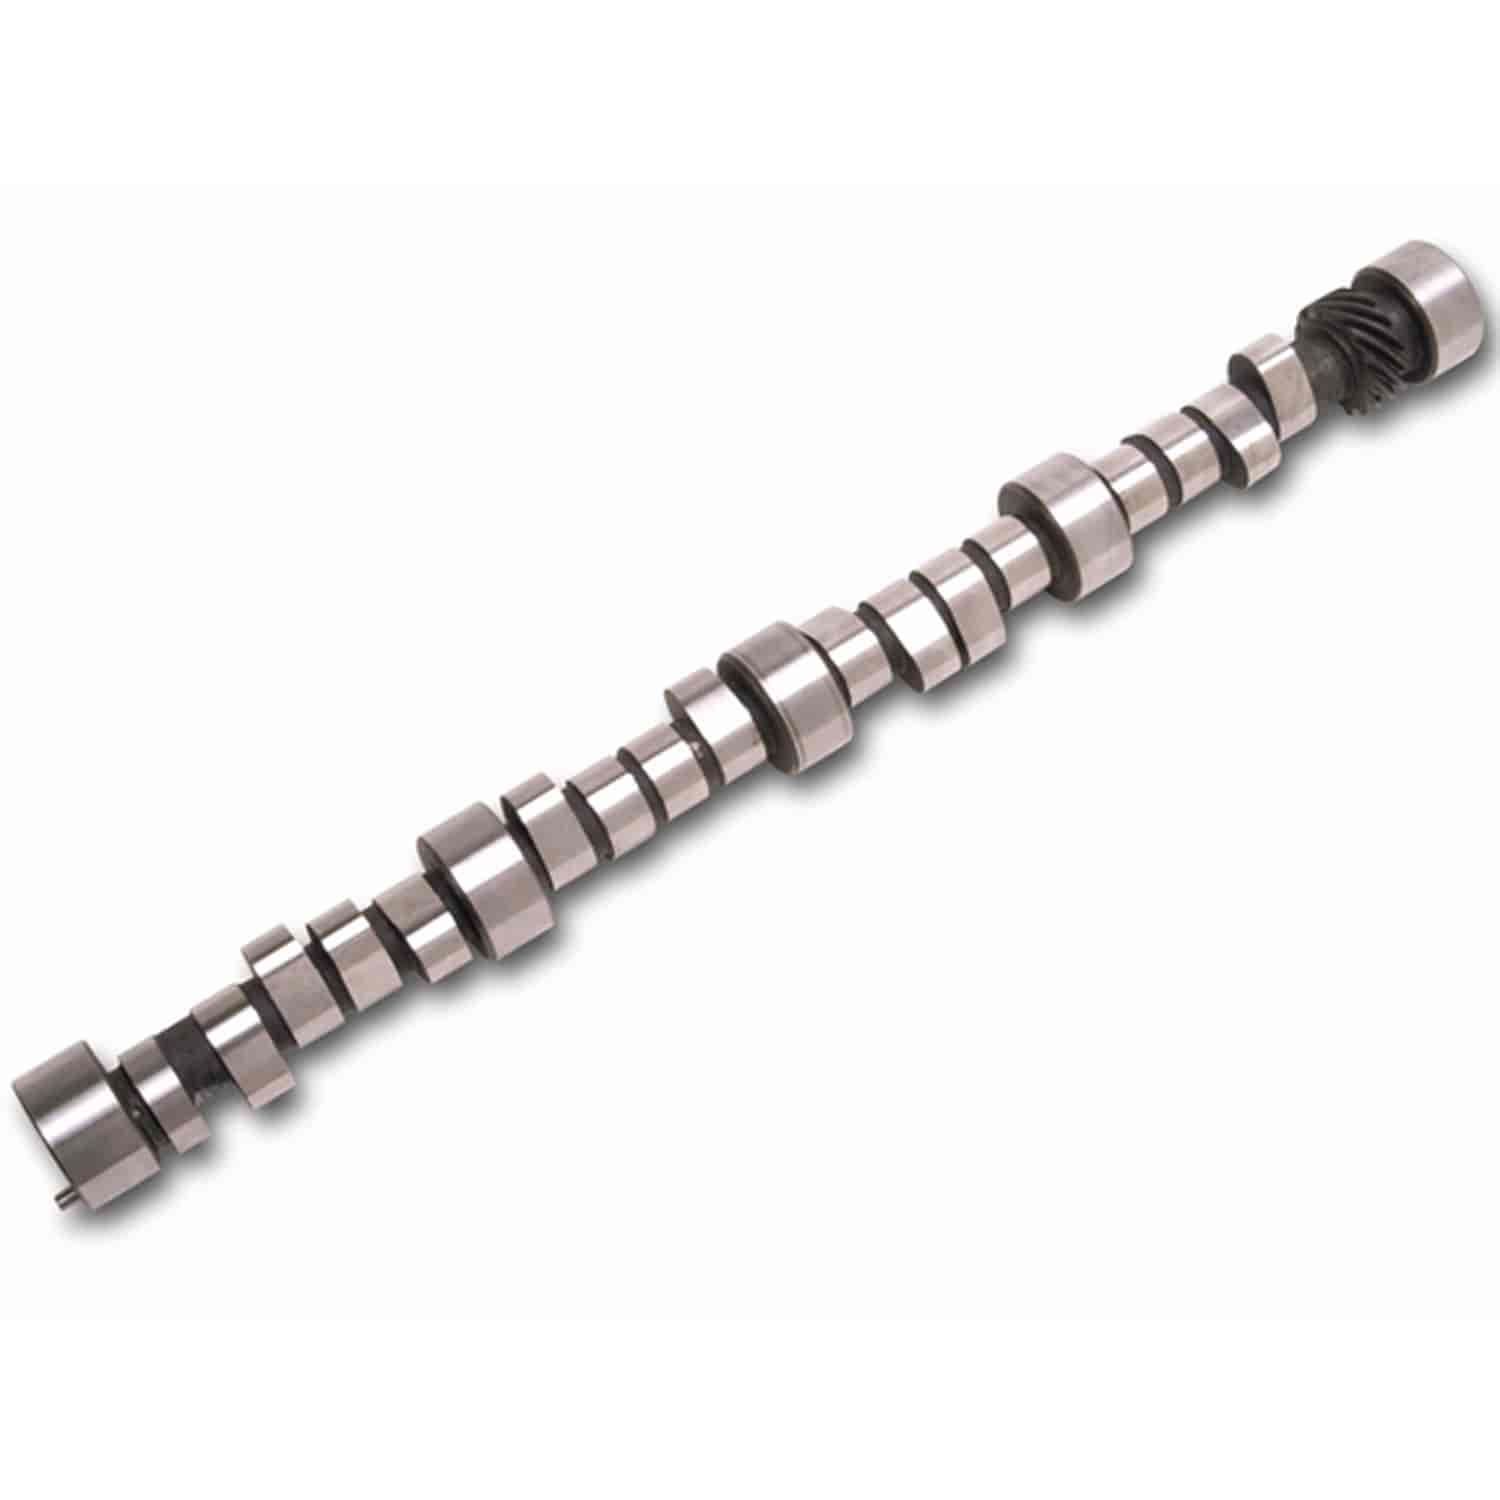 Rollin' Thunder Hydraulic Roller Camshaft for 1955-1986 Small Block Chevy